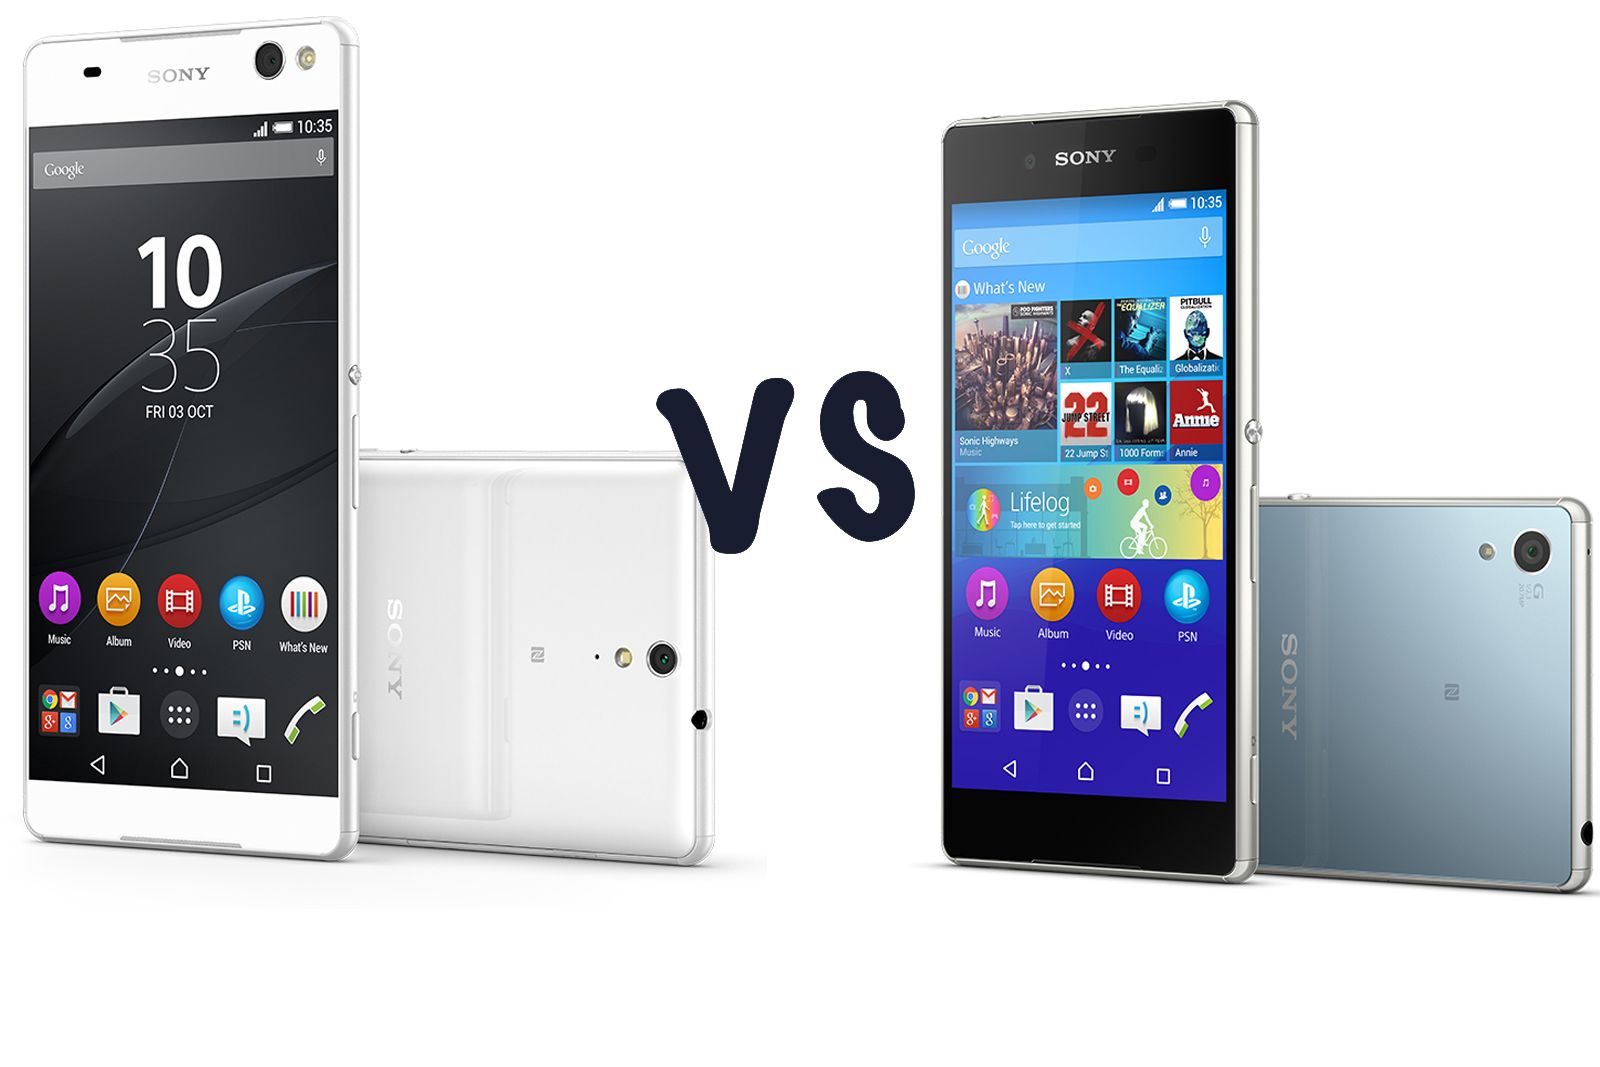 sony xperia c5 ultra vs sony xperia z3 what s the difference  image 1